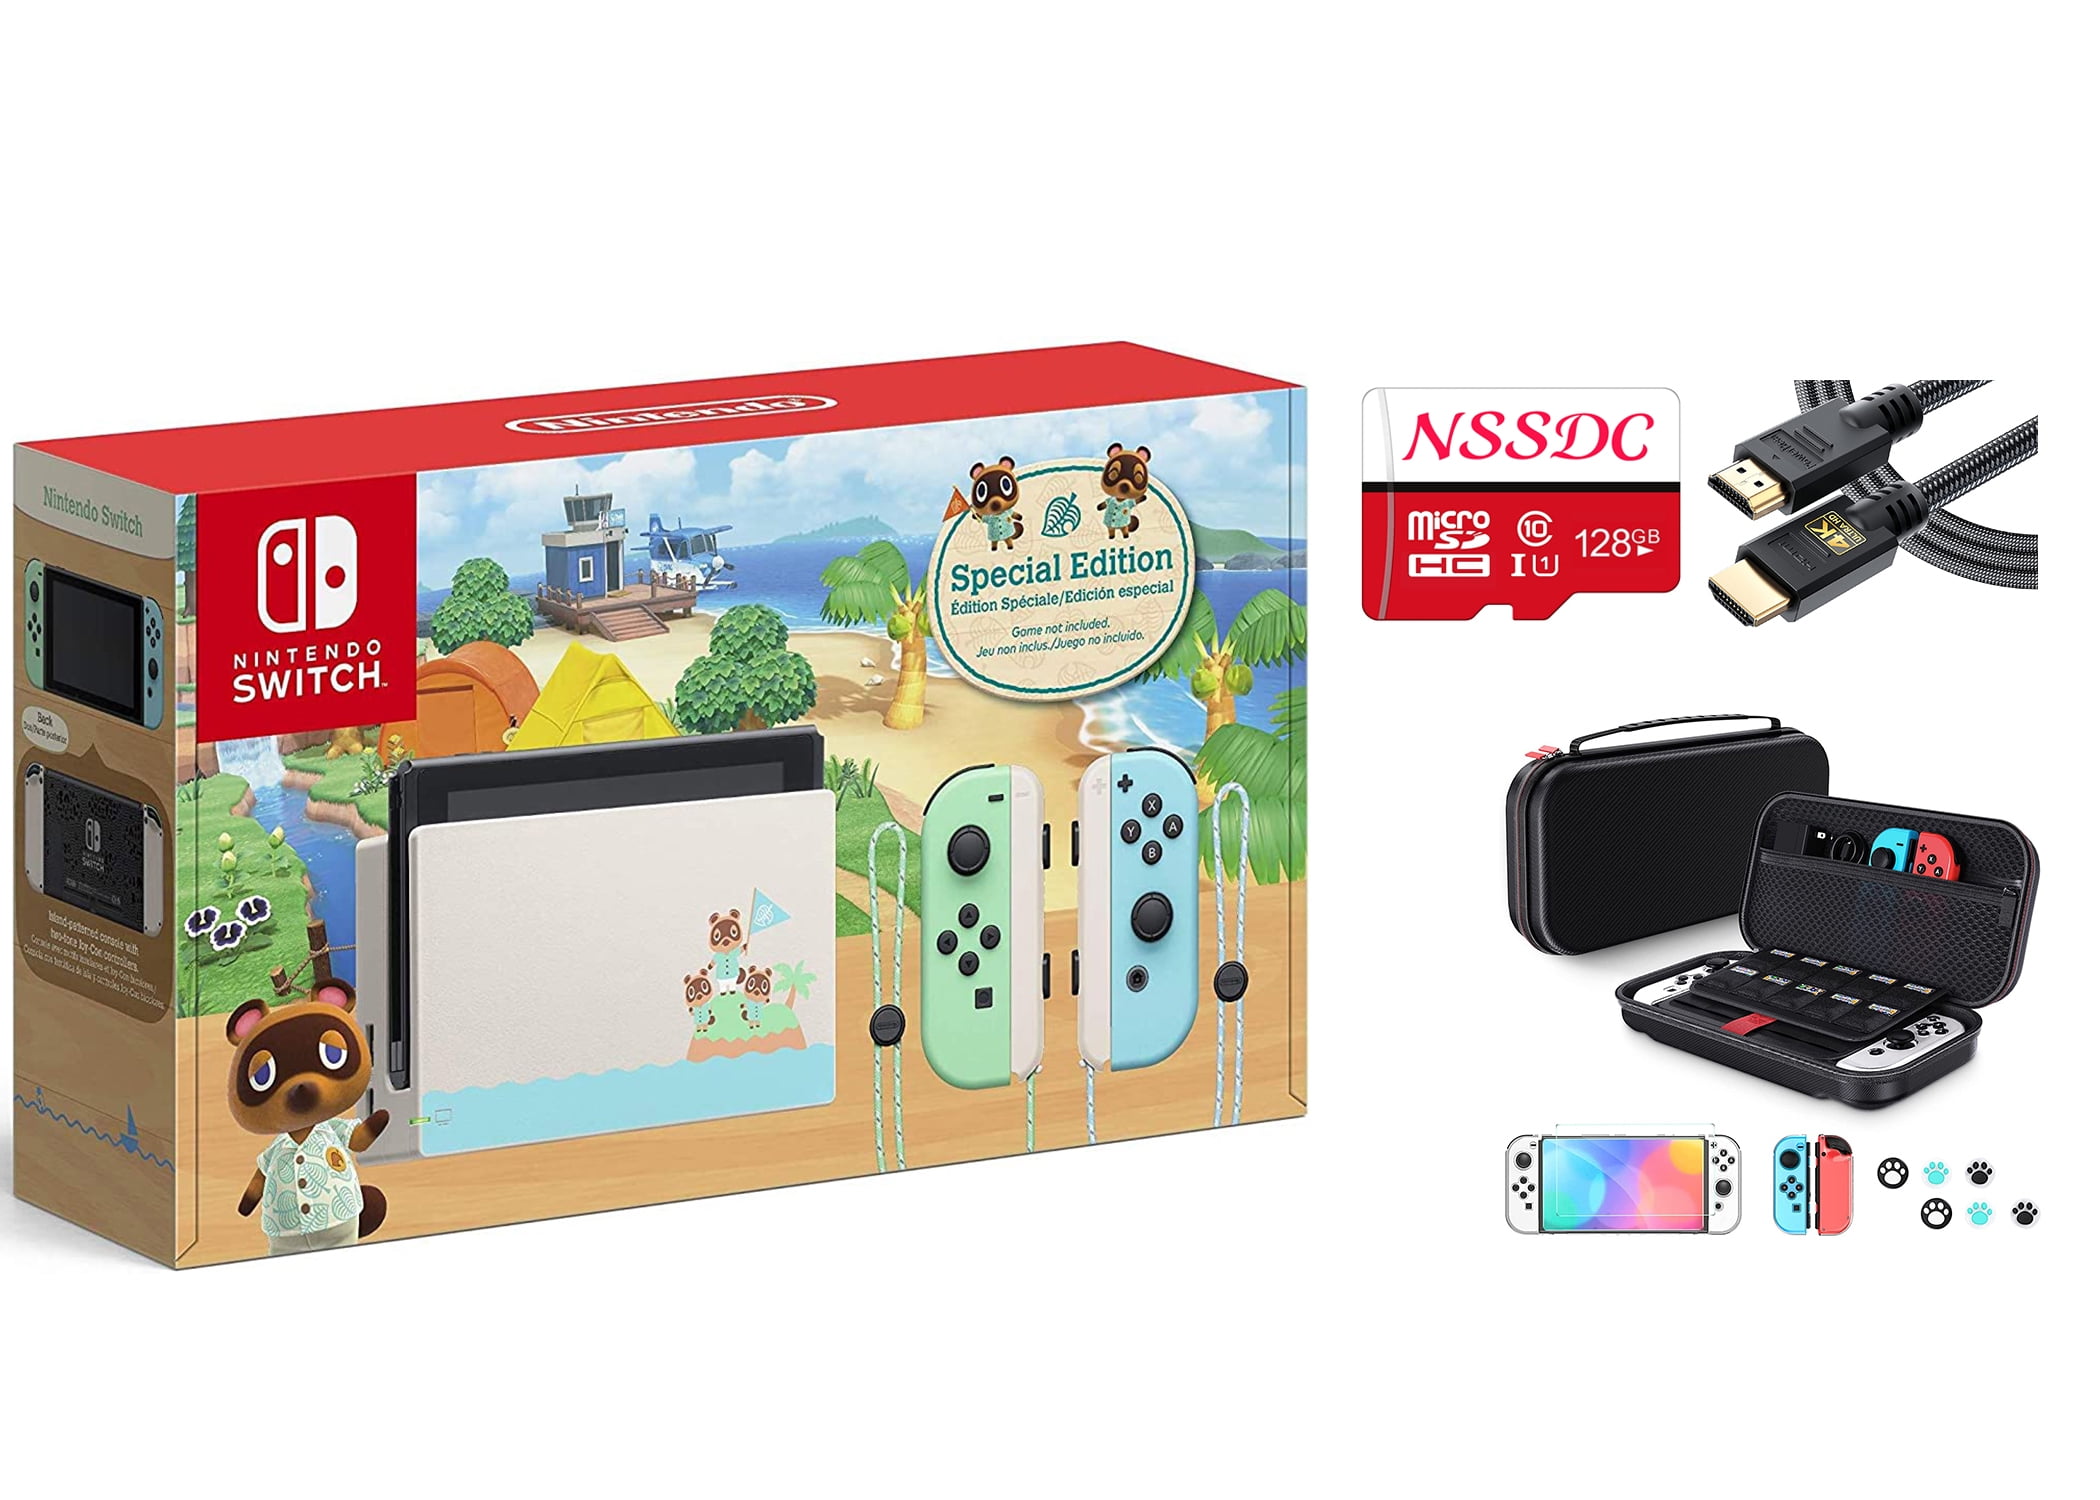 marv Bevidst berømt Nintendo Switch Bundle: Nintendo Switch Animal Crossing New Horizons Edition  32GB Console with NSSDC 128GB SD Card, HDMI cable, Nintendo Switch  Accessories Portable Travel Carrying Case - Walmart.com